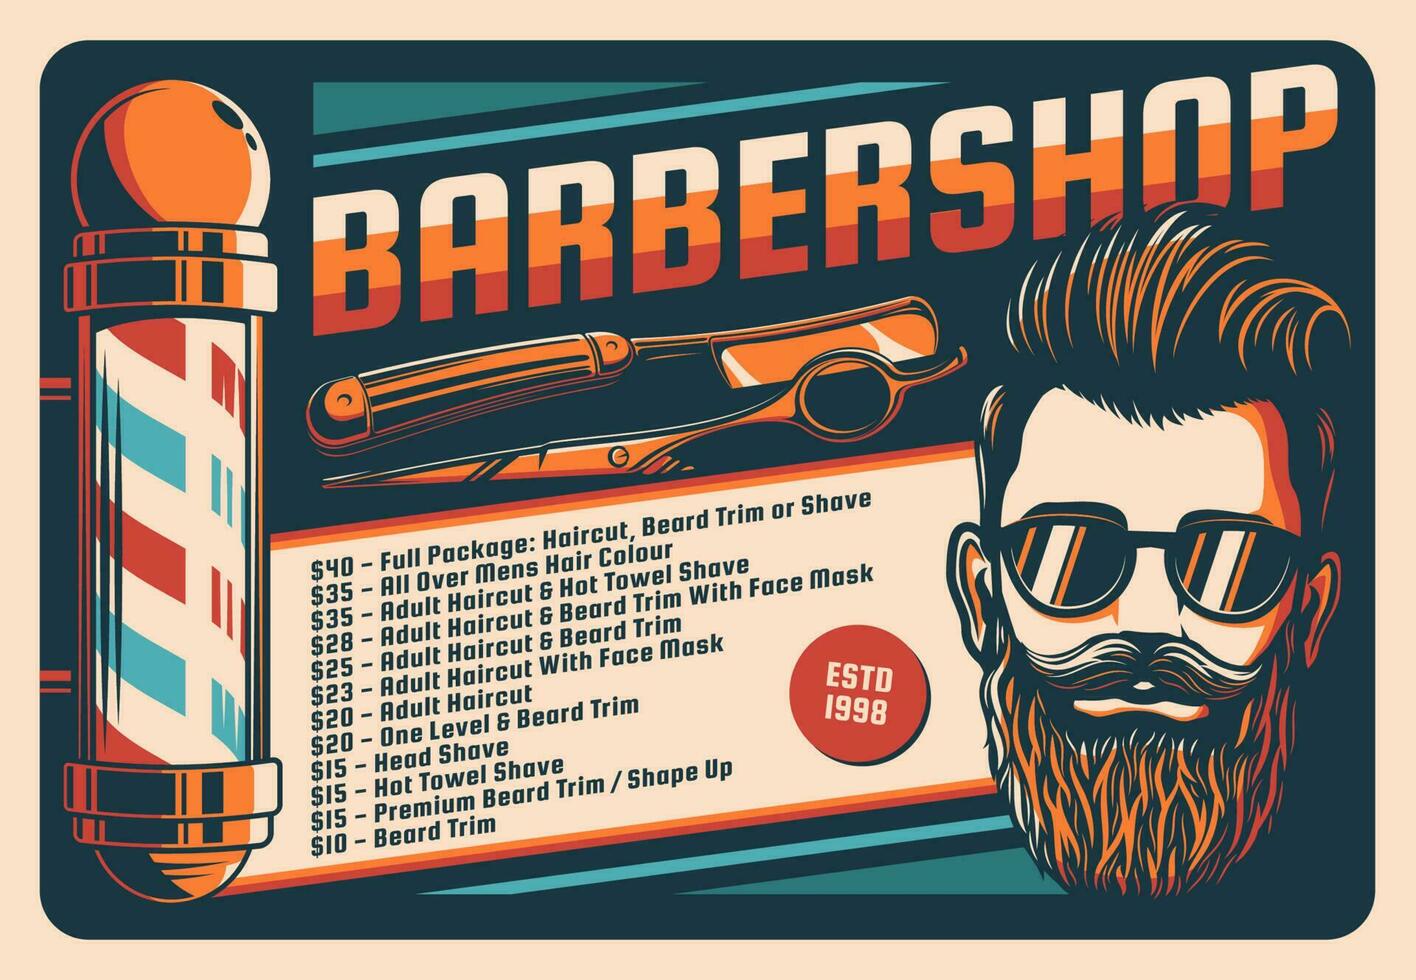 Barbershop retro banner with hipster, barber tools vector